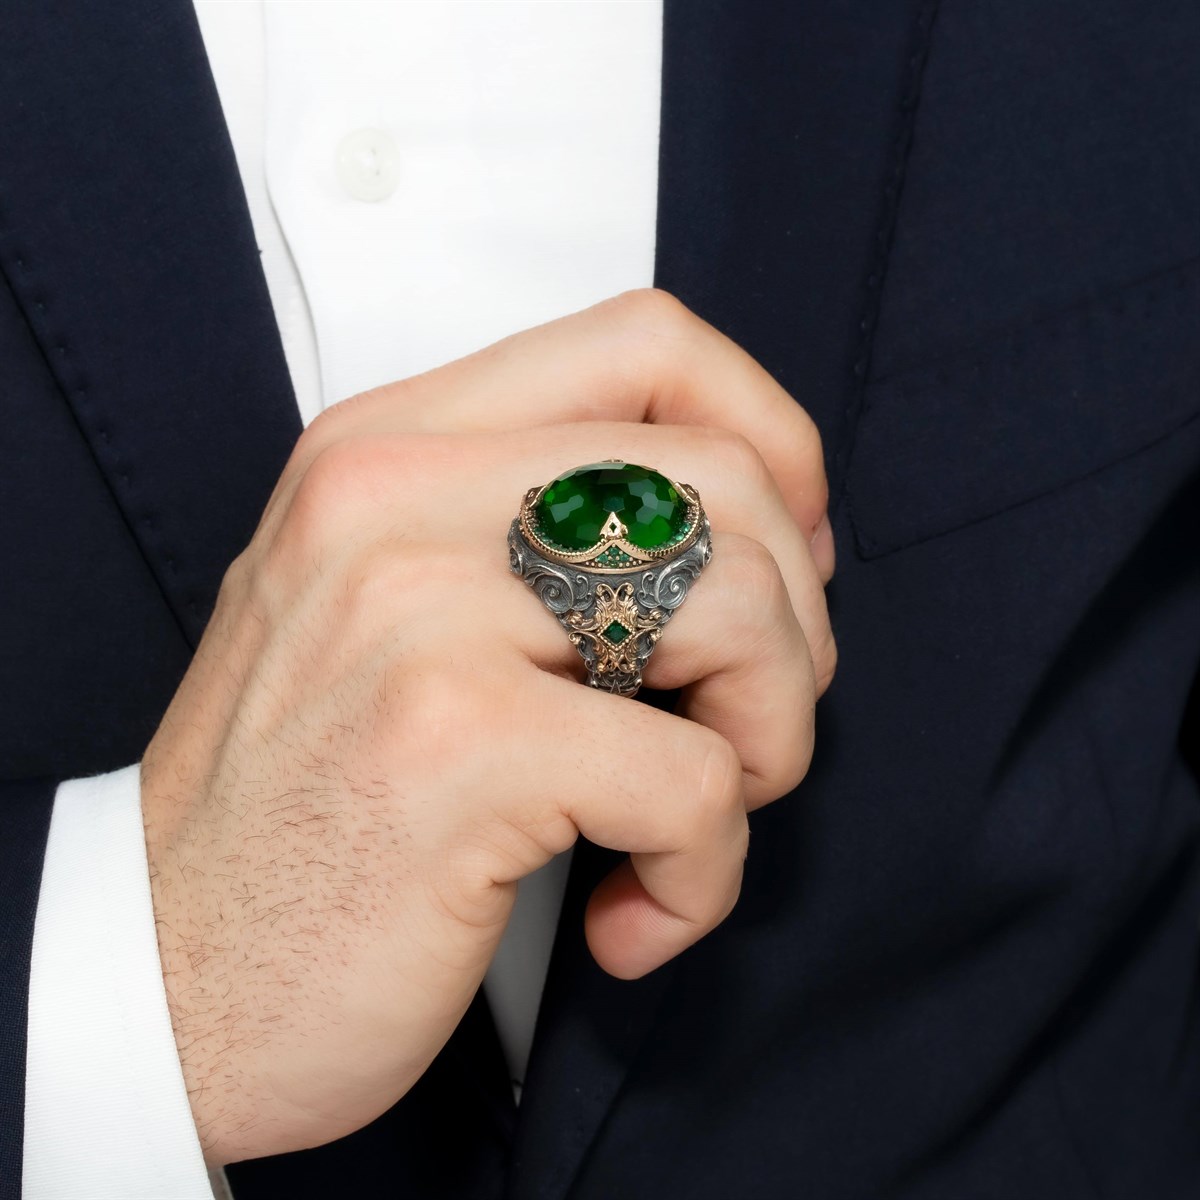 Green Zircon Stone Embroidered Sterling Silver Men's Ring